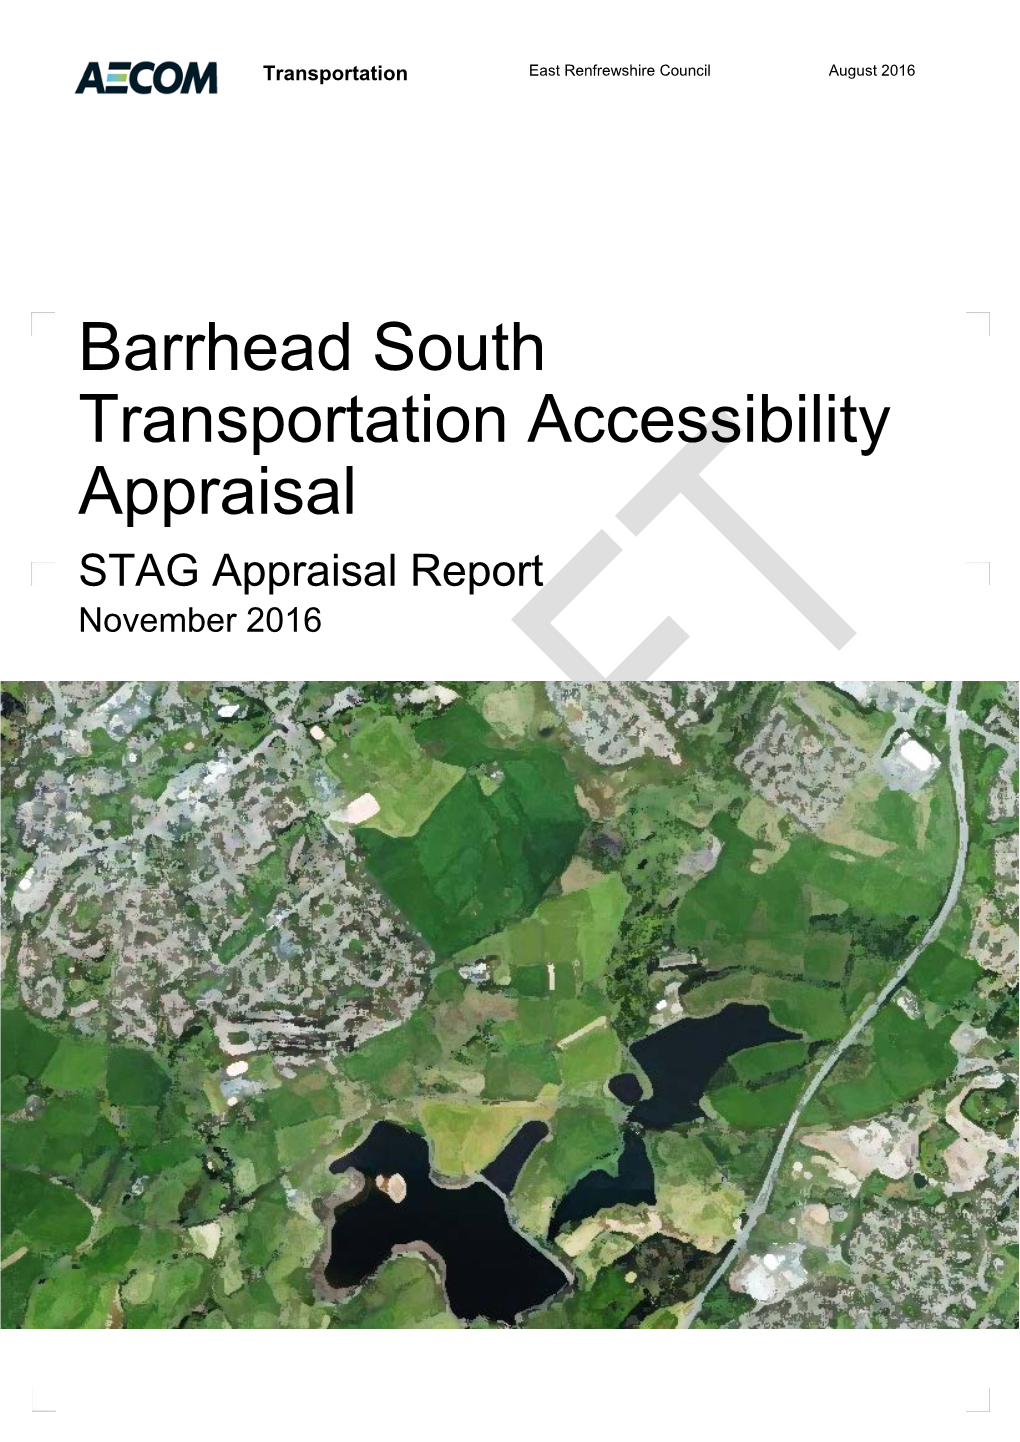 Barrhead South Transportation Accessibility Appraisal STAG Appraisal Report November 2016